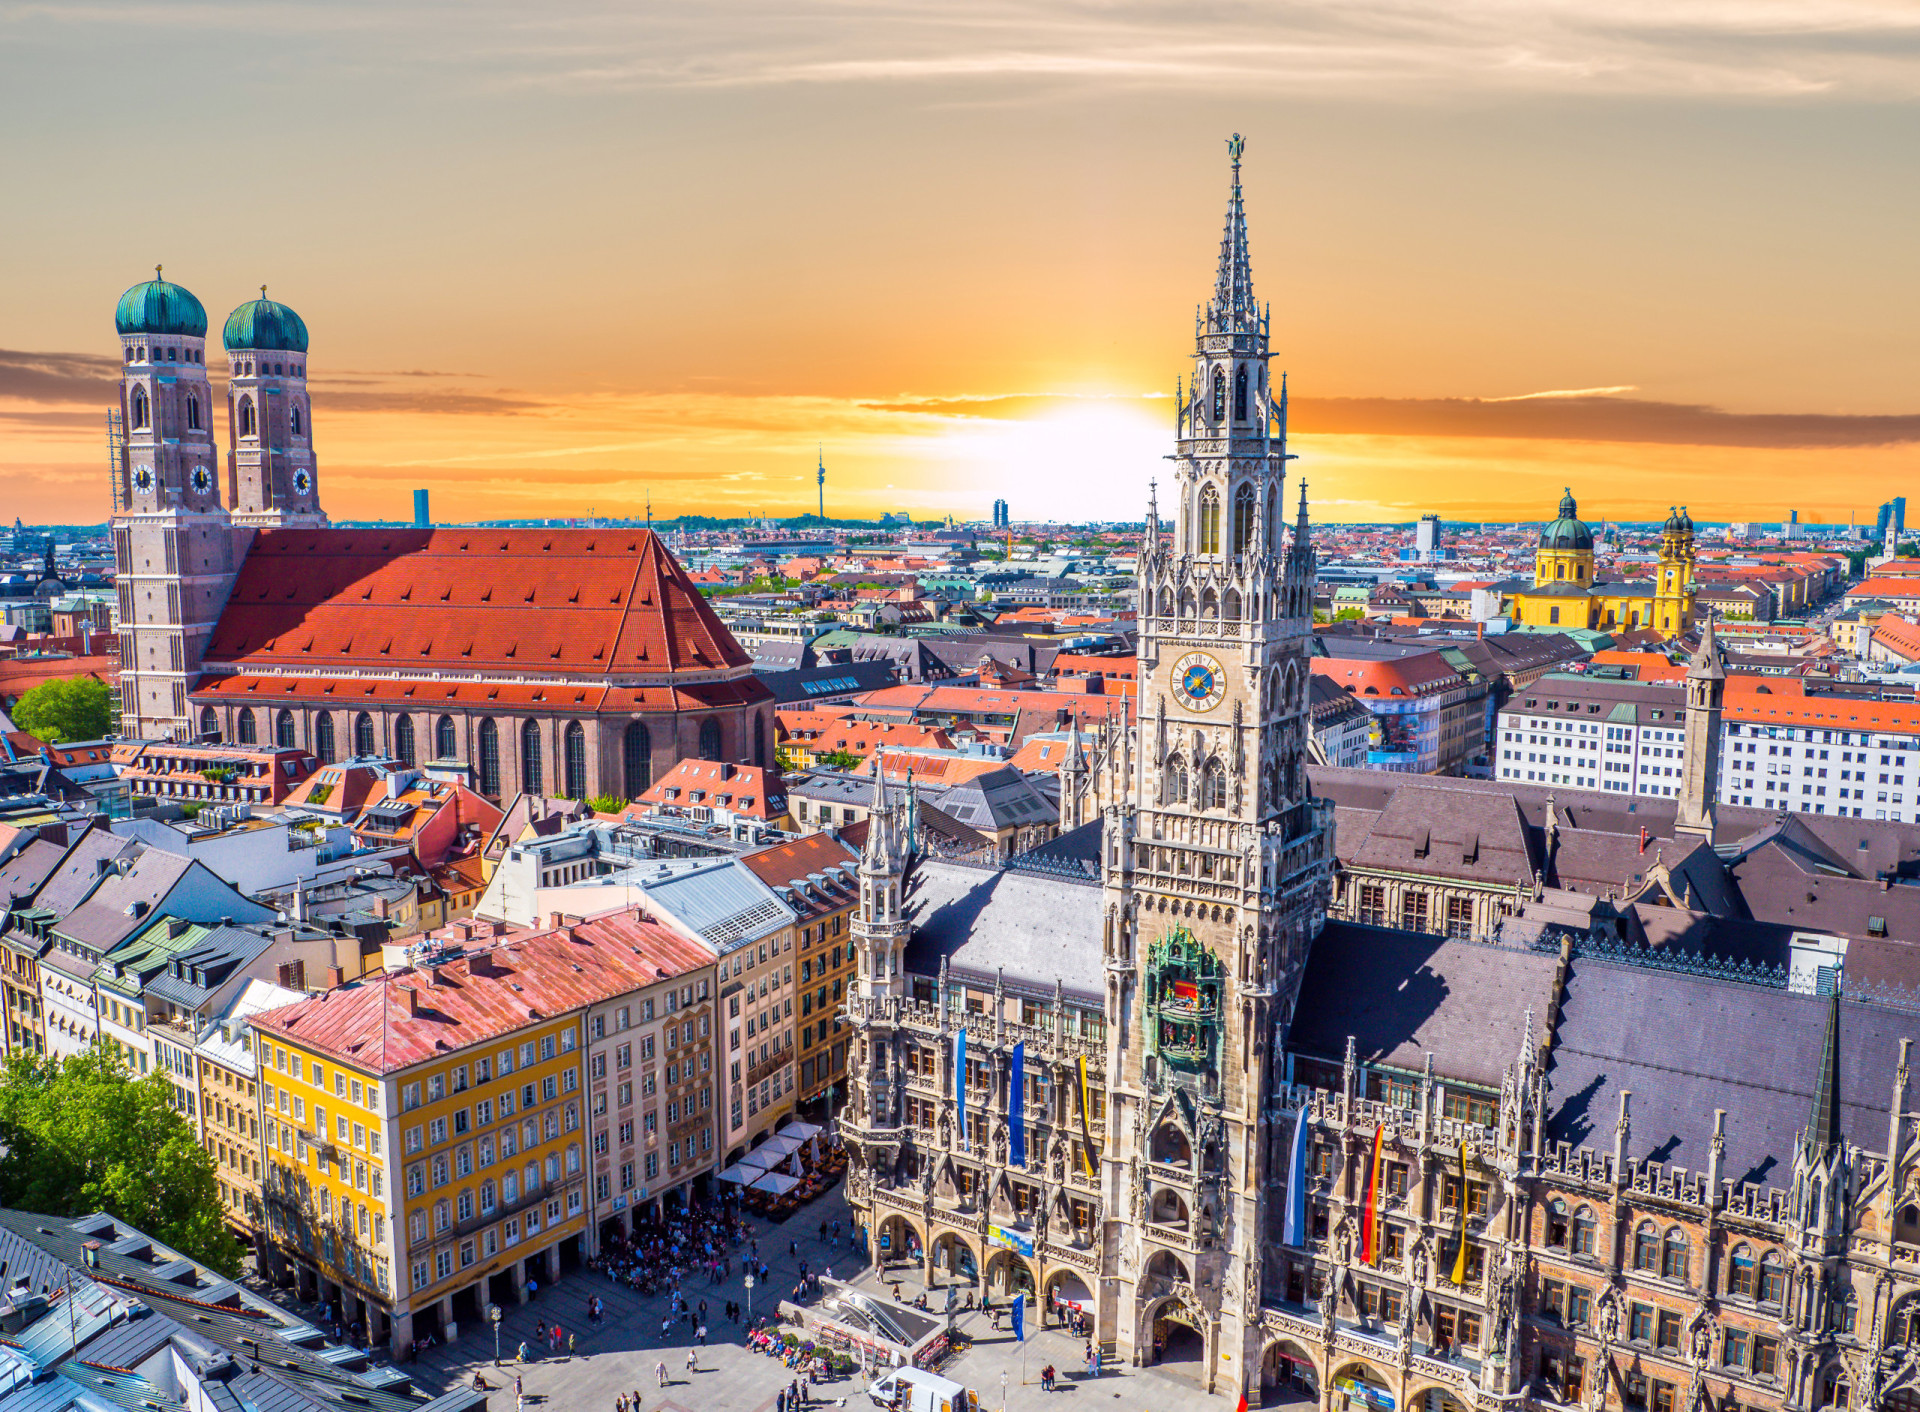 <p>Munich, for example, exudes Bavarian flavor and thrills the visitor with an appetizing mix of distinguished landmarks, engaging museums, and a countryside overlooked by the Alps.</p><p>You may also like:<a href="https://www.starsinsider.com/n/185952?utm_source=msn.com&utm_medium=display&utm_campaign=referral_description&utm_content=636762en-en_selected"> Can you name these successful actors?</a></p>